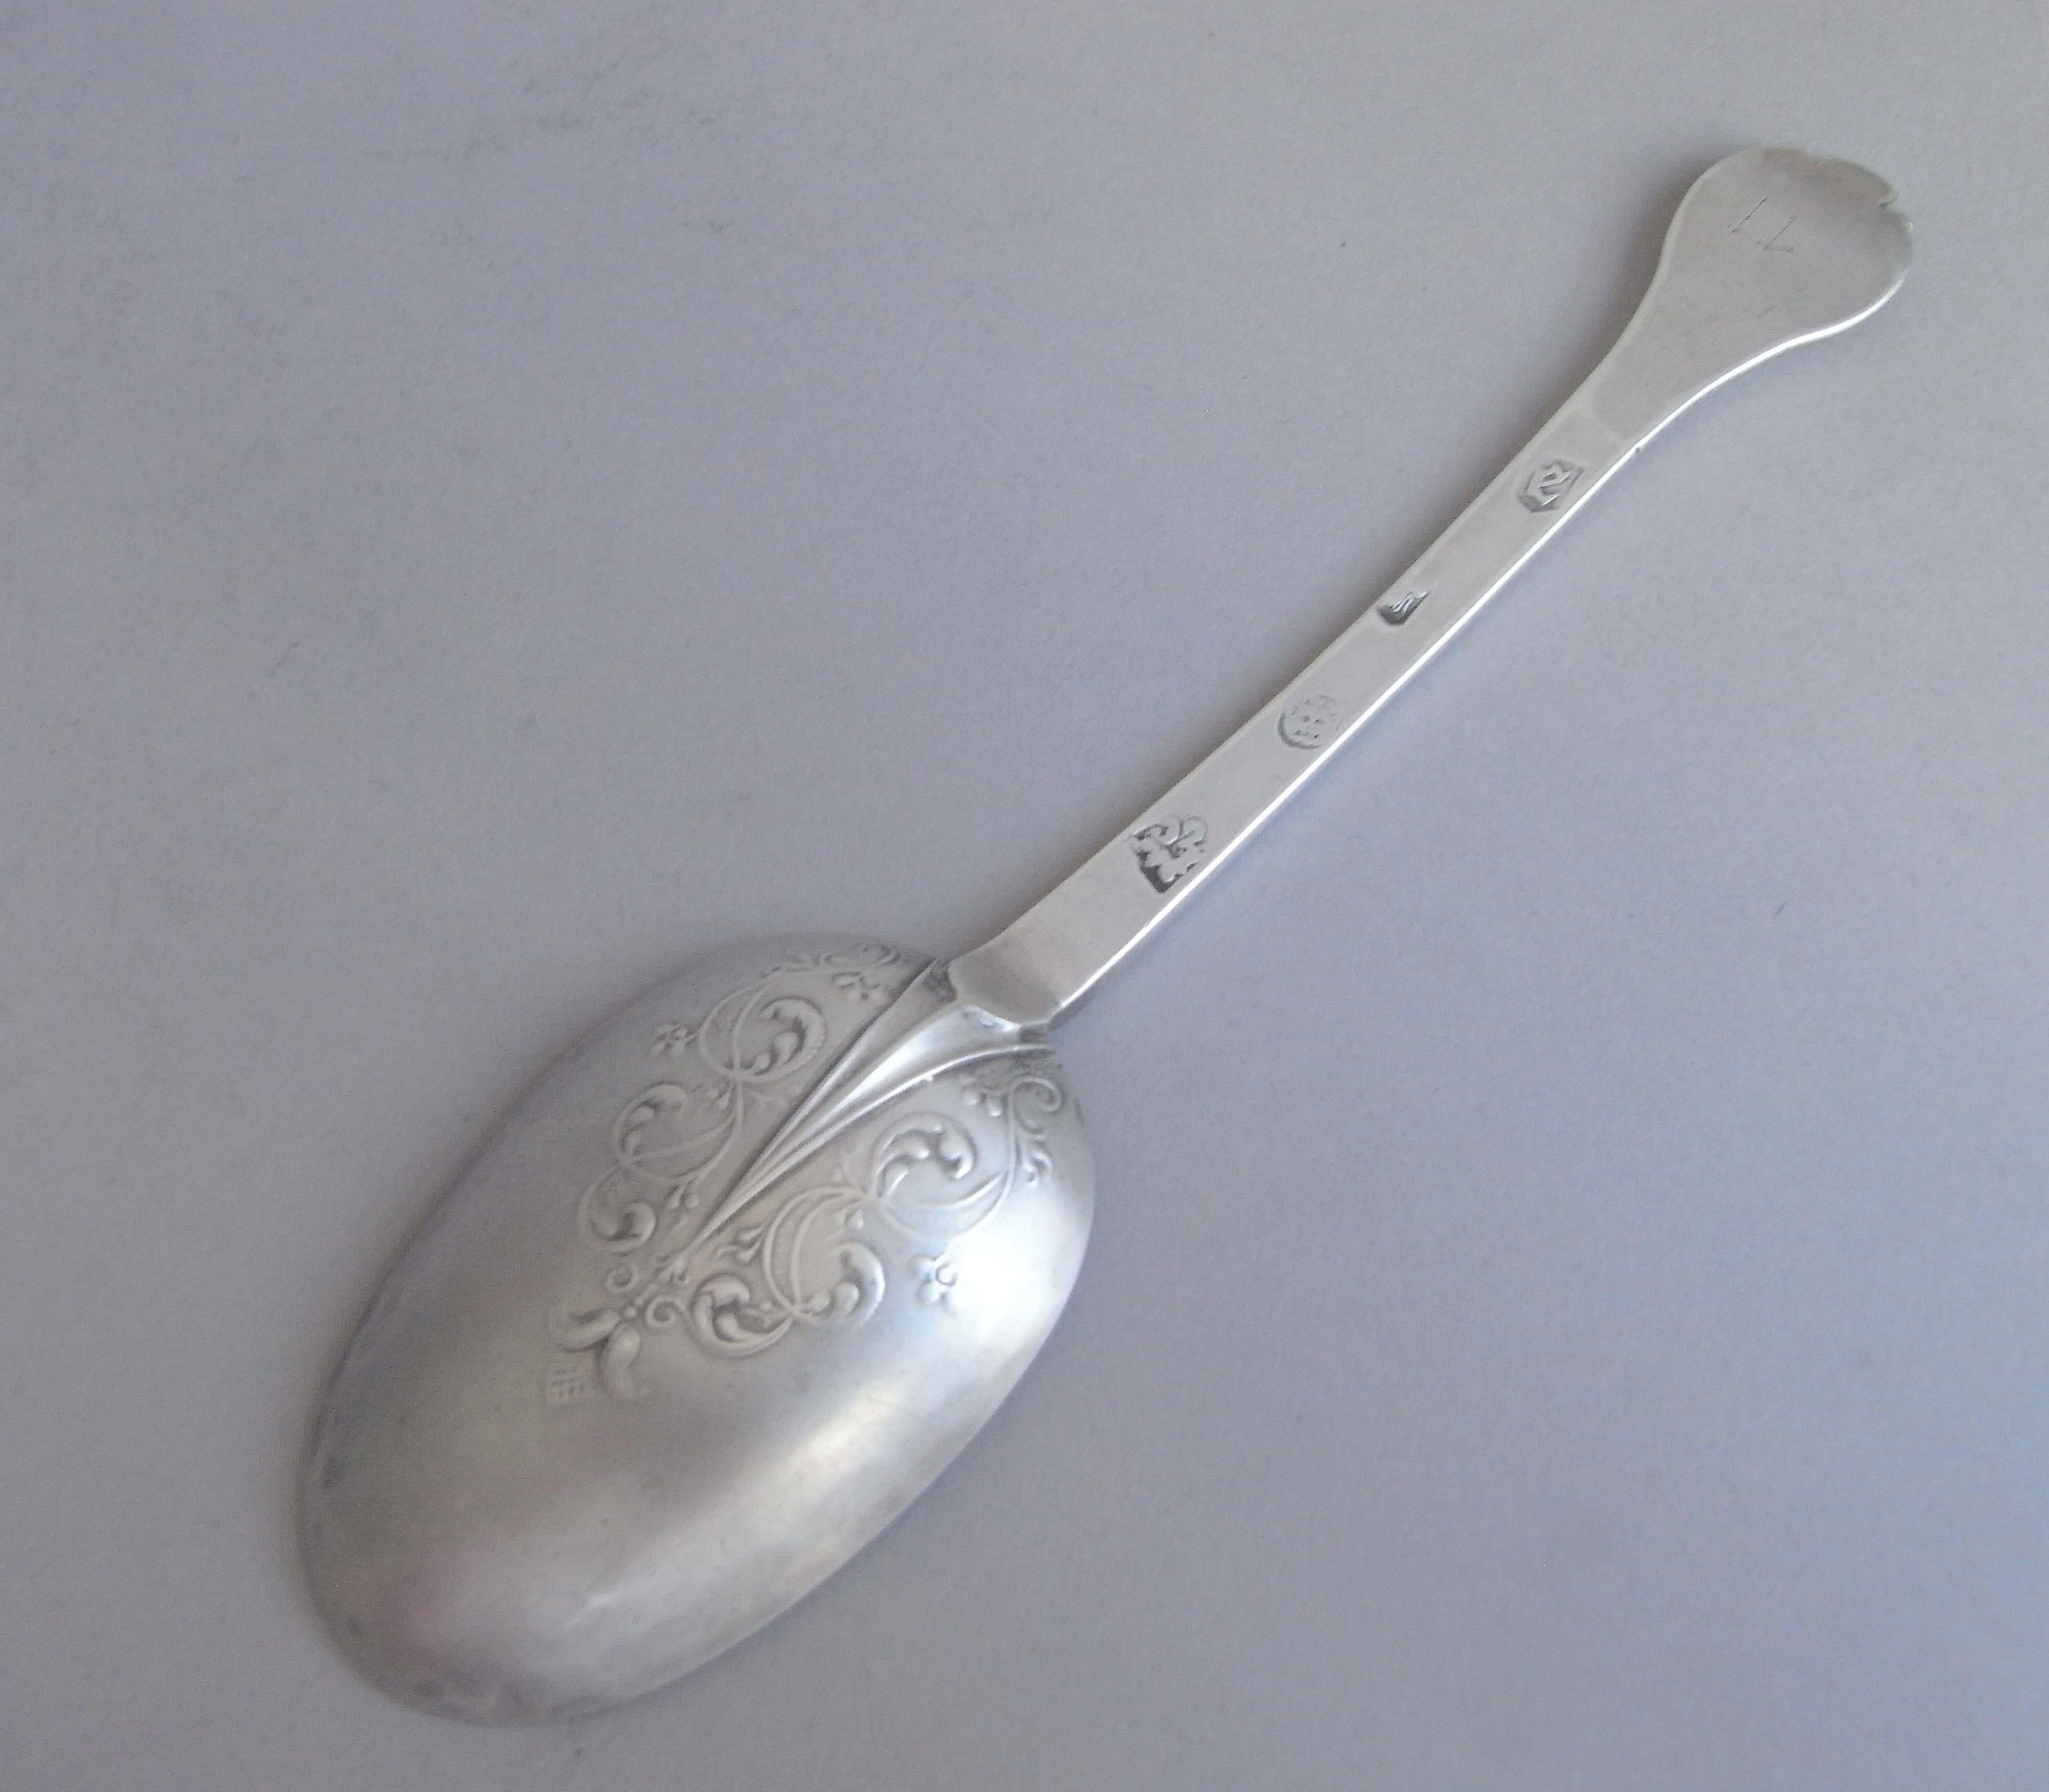 Thisvery rare antique sterling silver Spoon is modelled in the Trefid style and the back of the bowl displays finely detailed scroll lace work entwined with beaded bands, around a raised reeded rat tail. The back of the stem displays a good set of